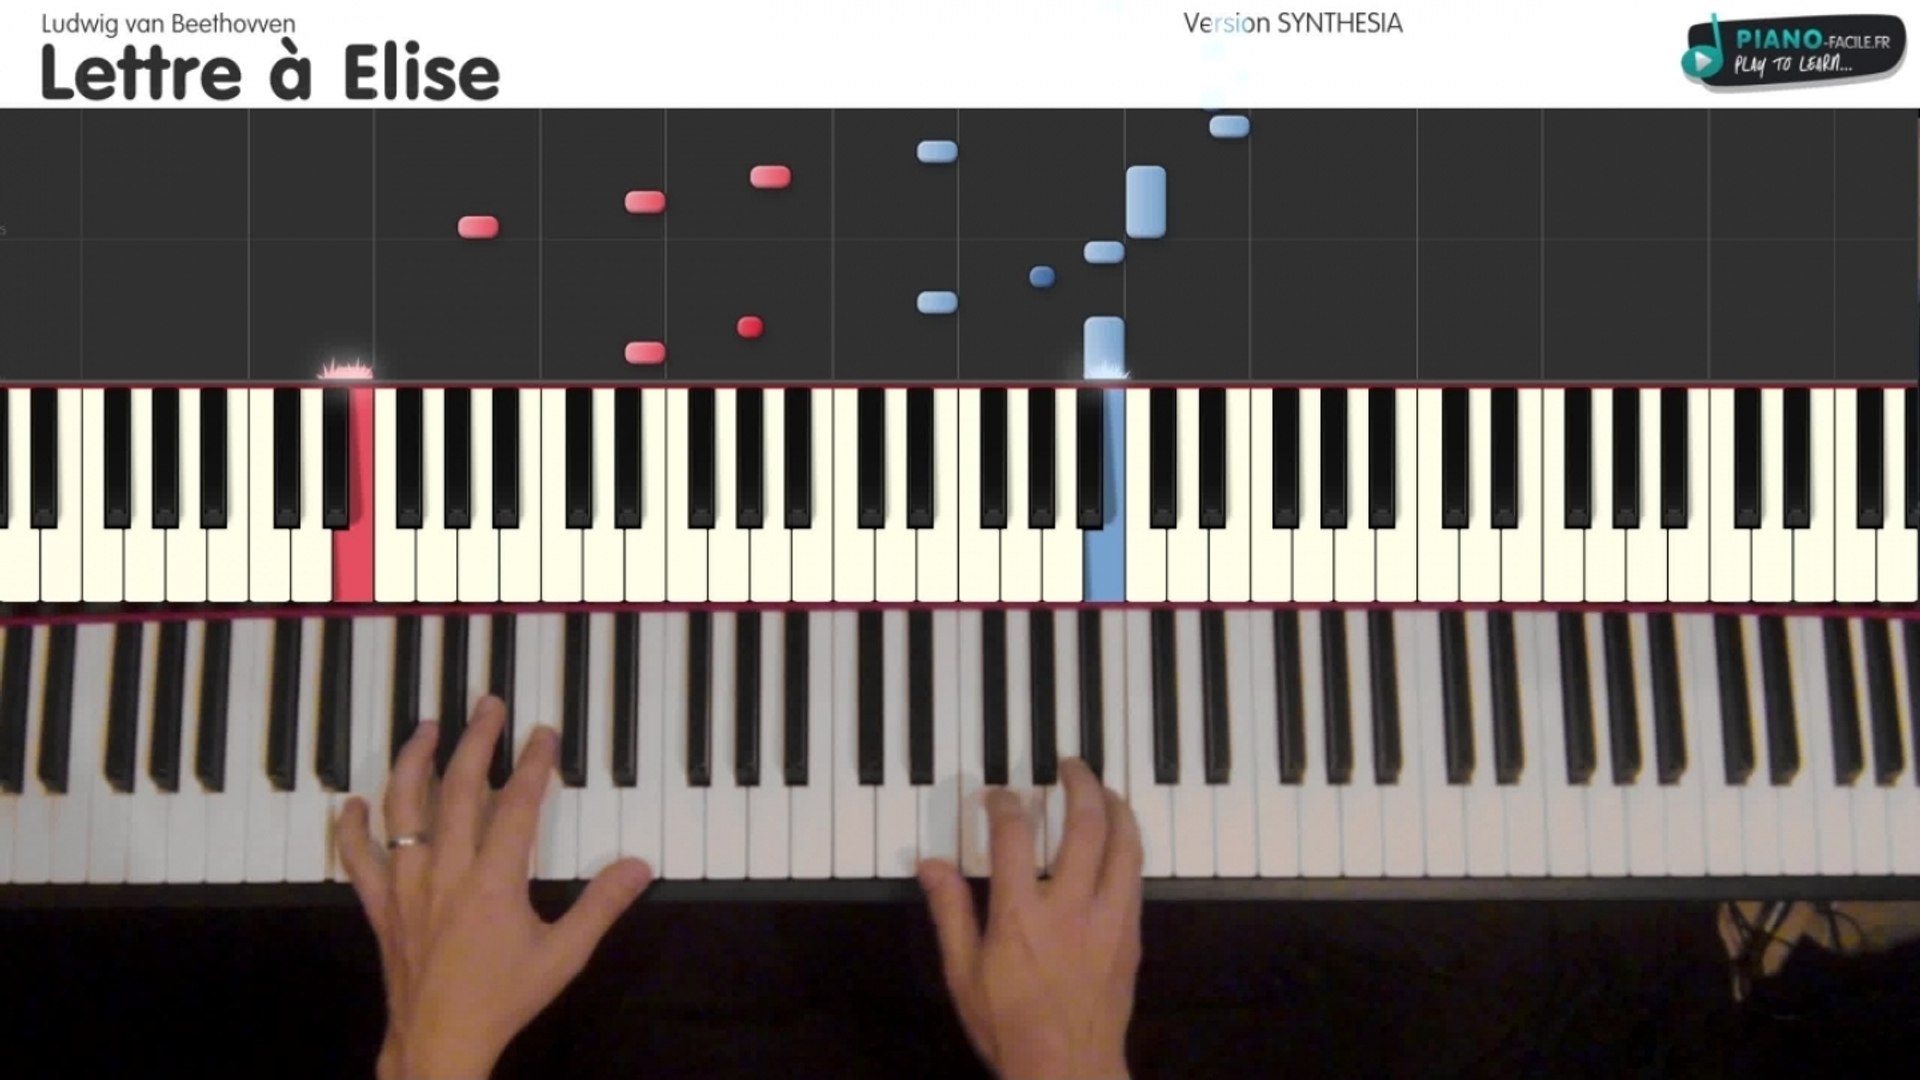 Lettre à Elise - Ludwig van Beethovven - [Tutorial Piano] (synthesia) - S -  Vidéo Dailymotion